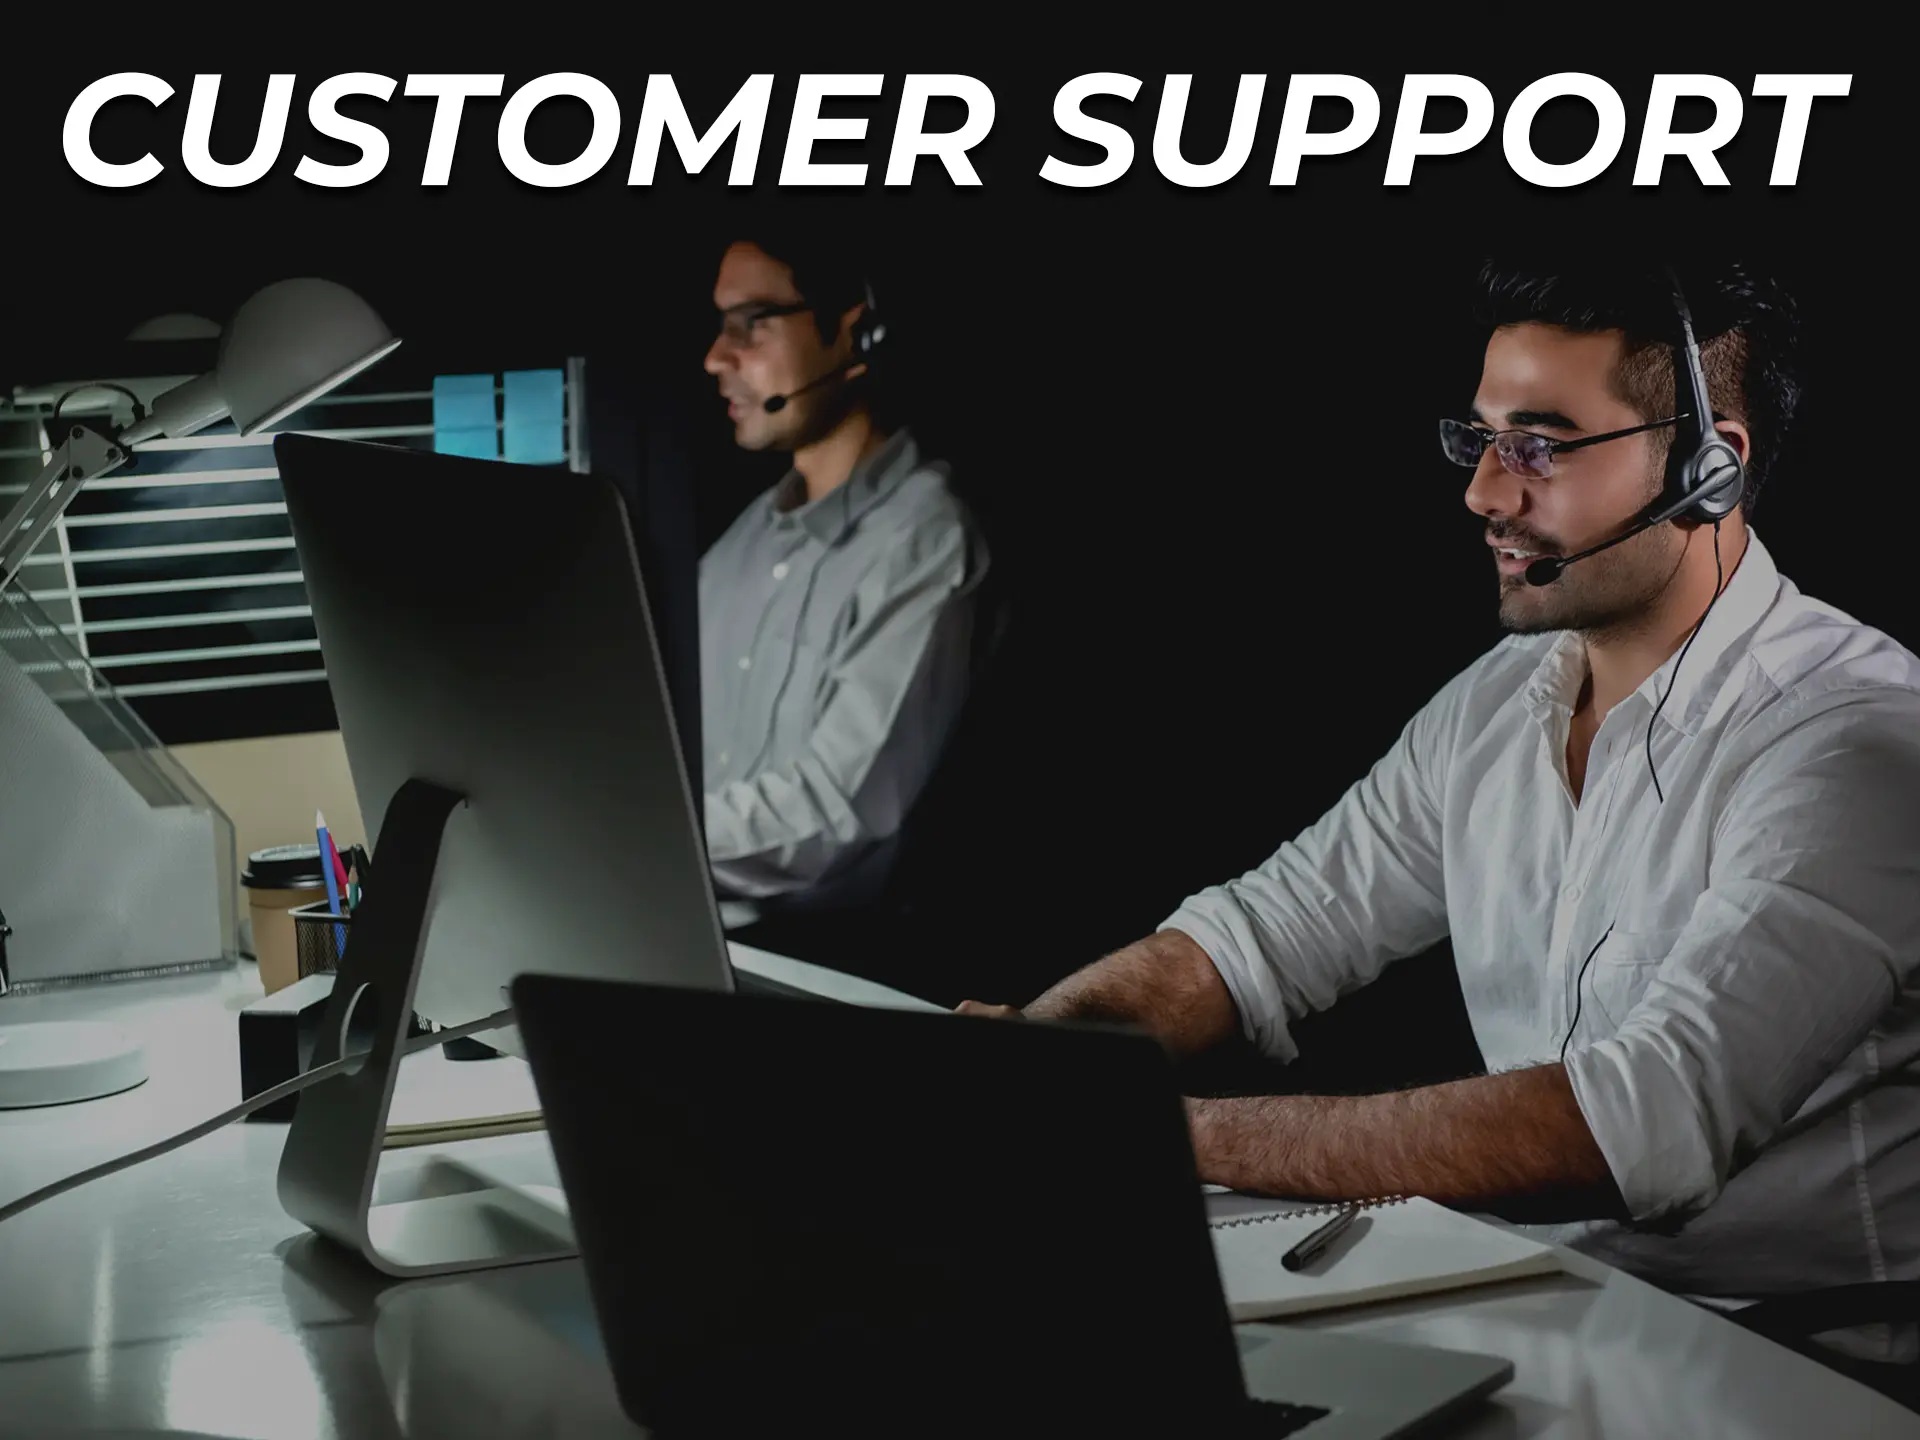 Effective support and responsiveness of the support team affects user satisfaction.